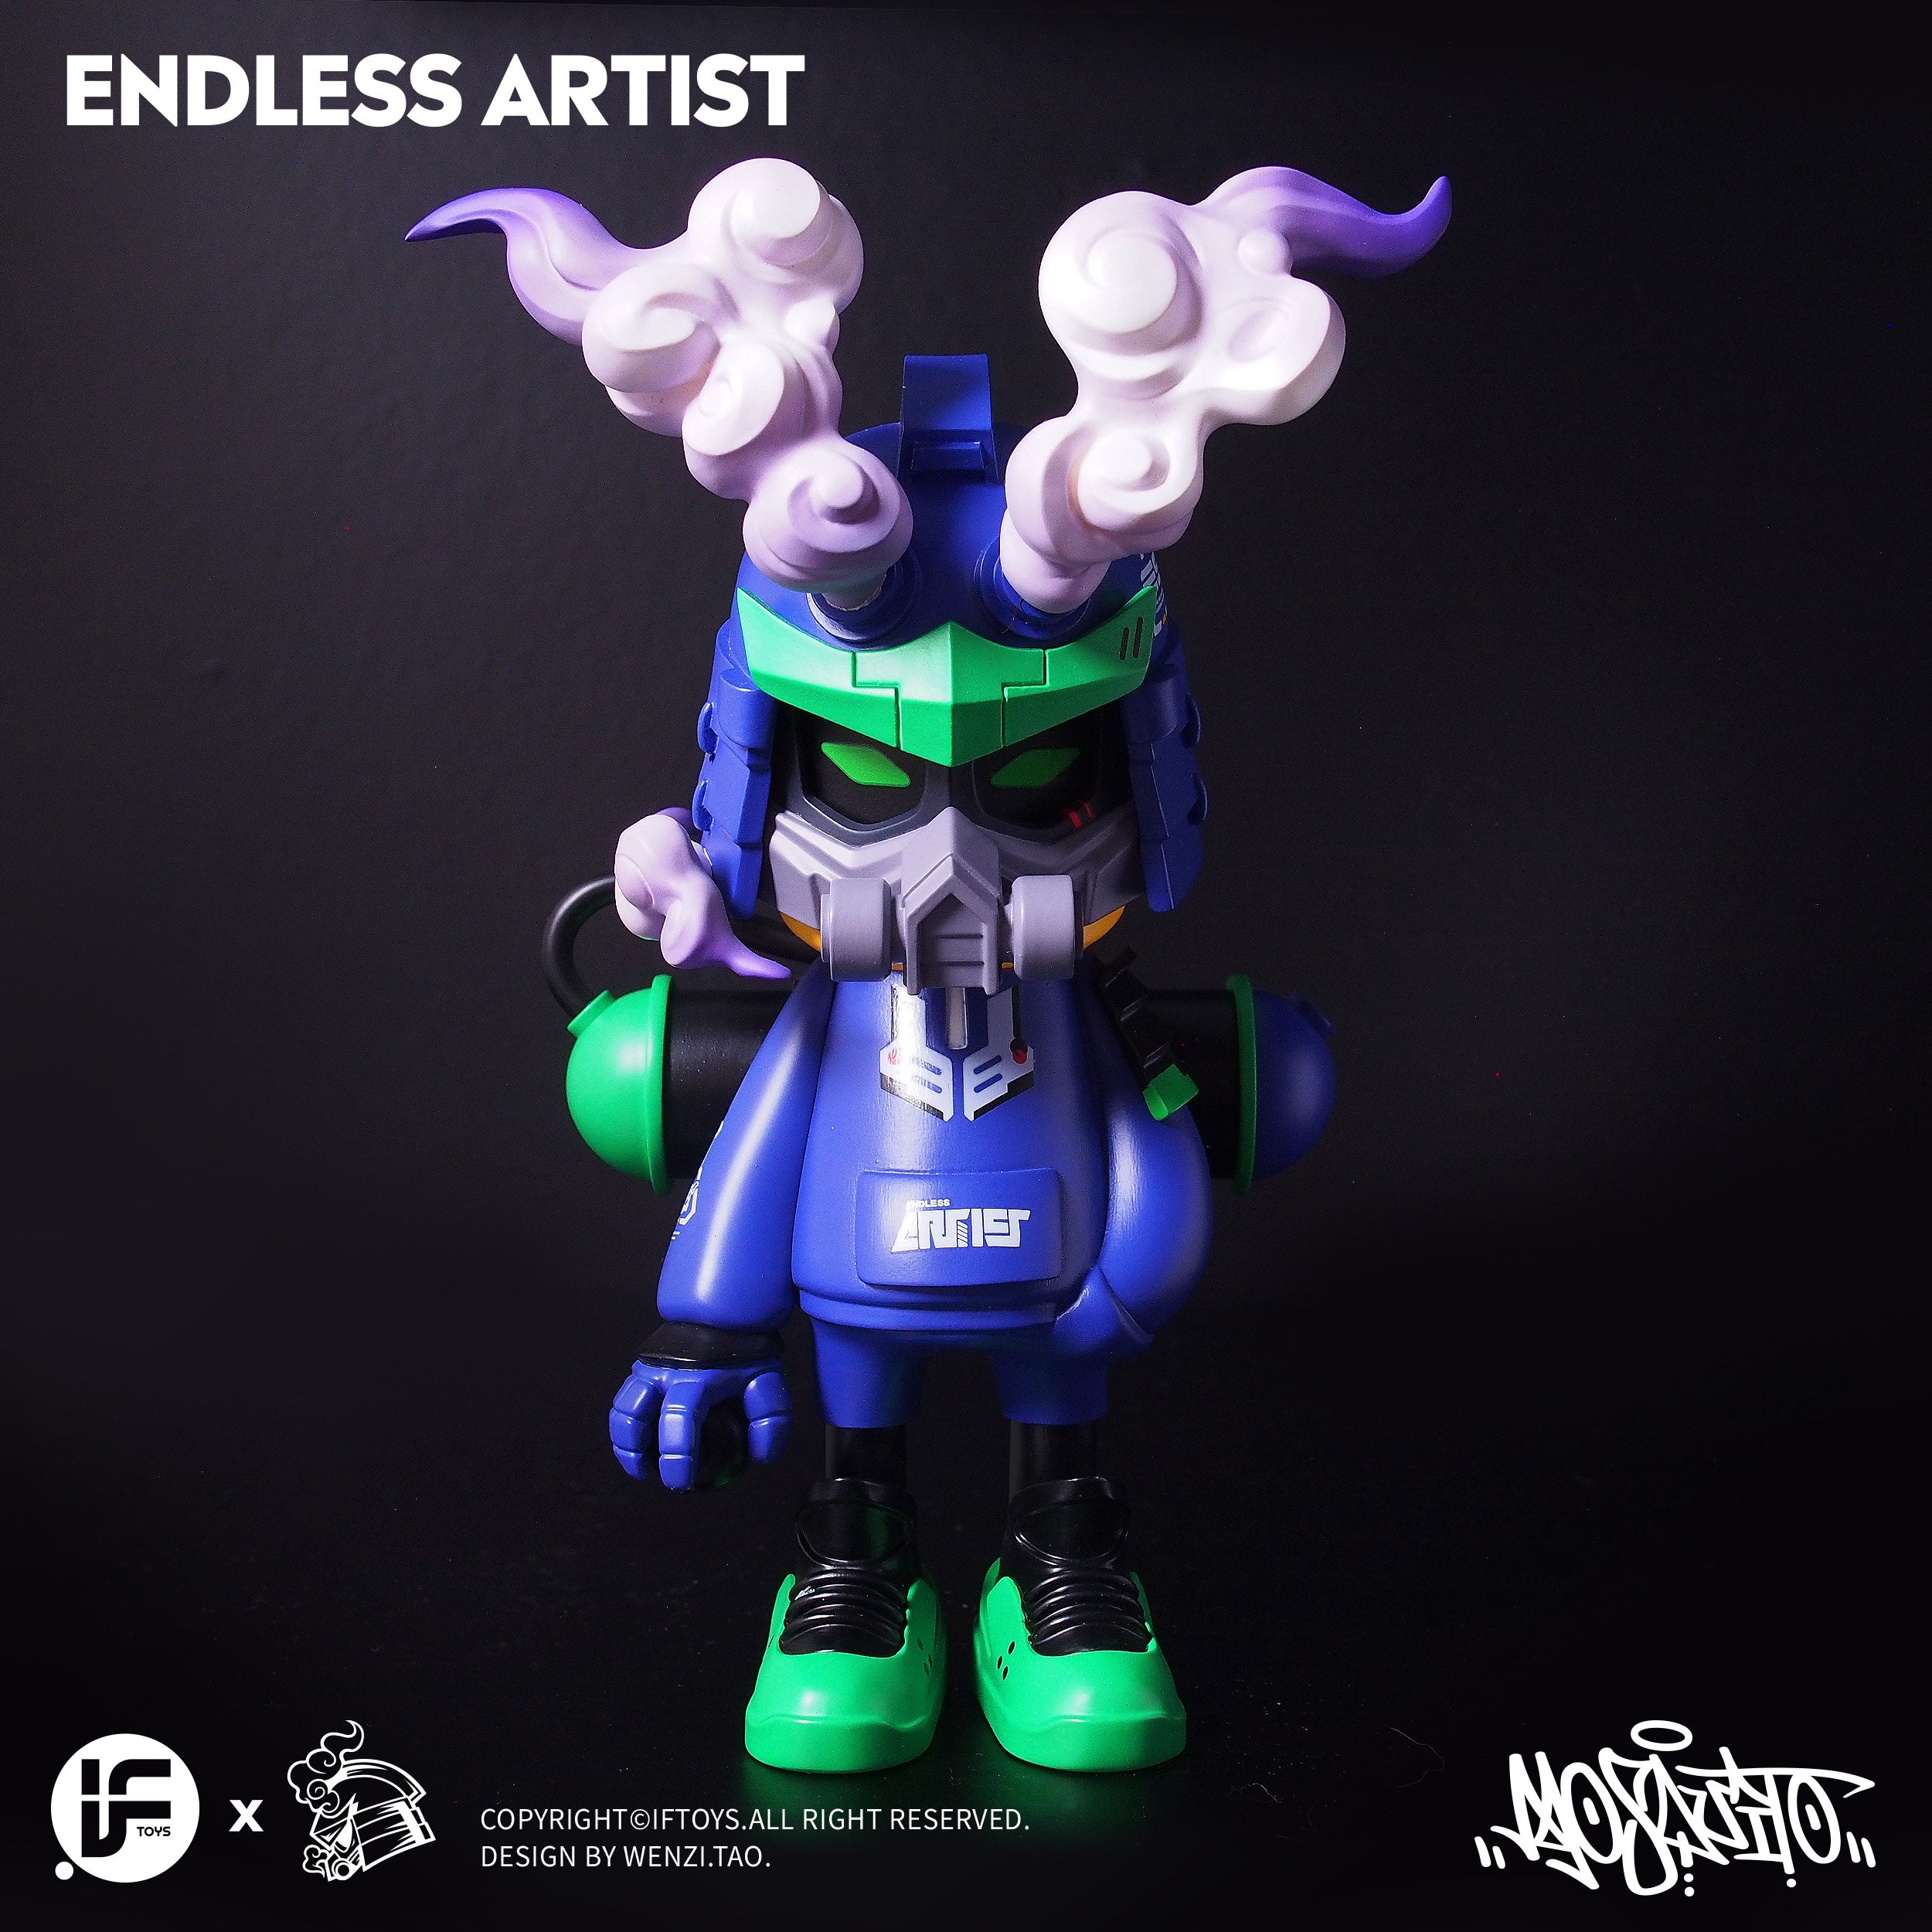 Endless Artist The E9 MACHINE - Limited Edition By Wenzi.Tao x Iftoys